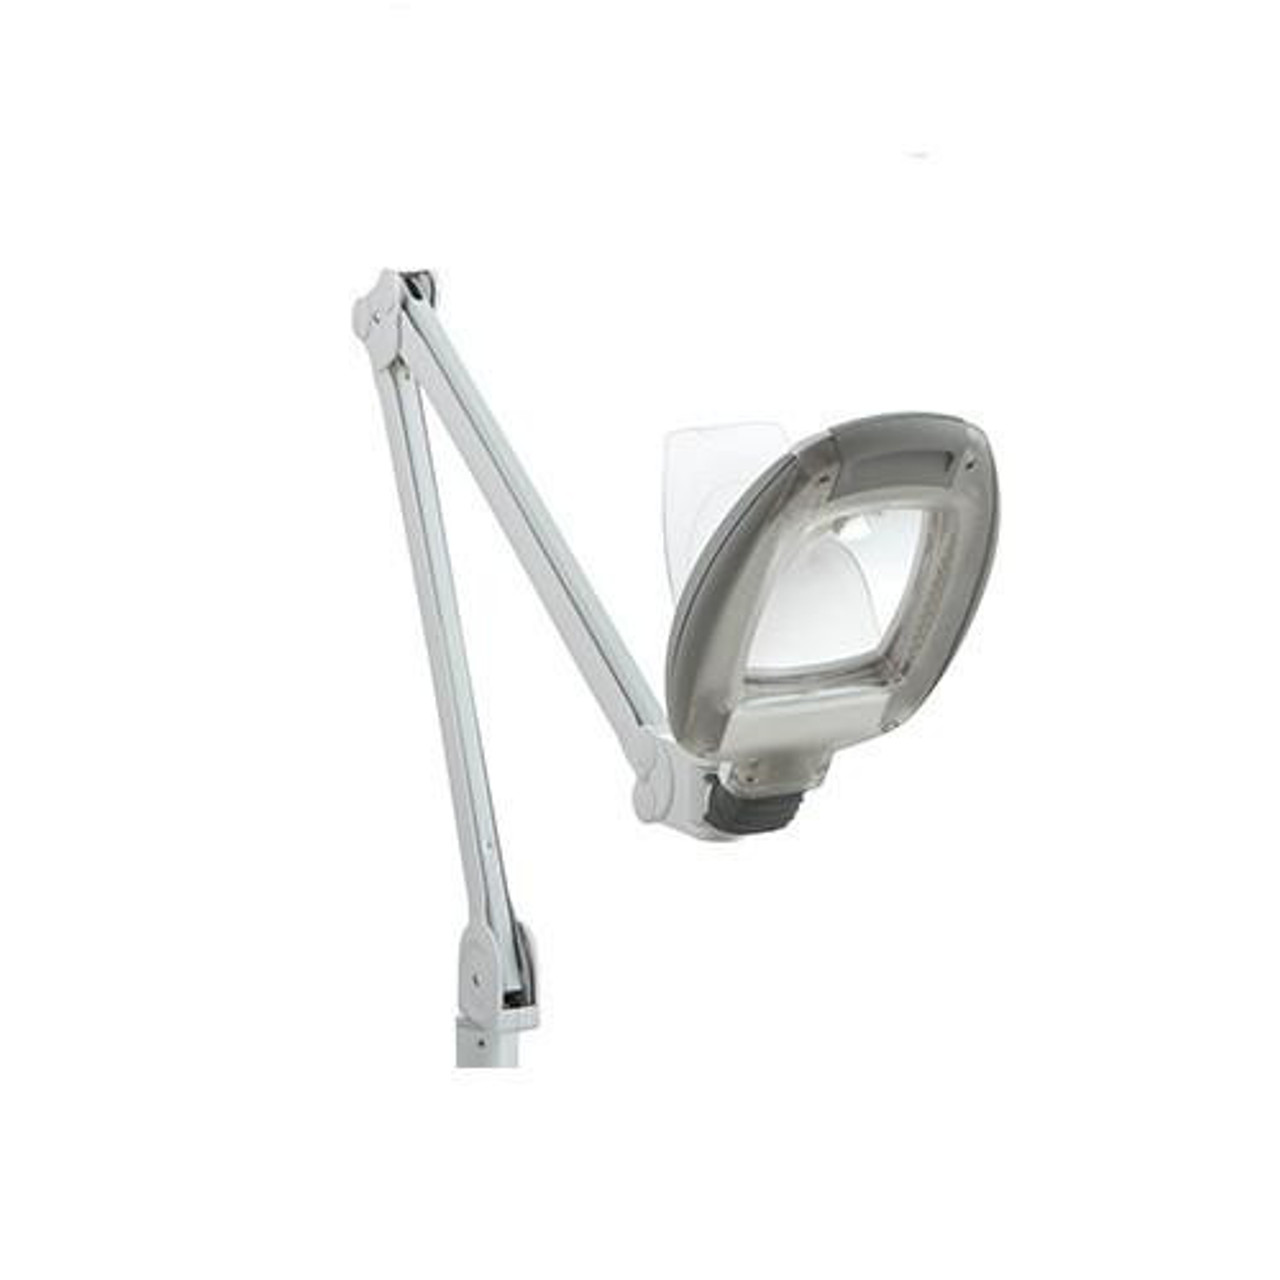 LIGHT IT! By Fulcrum, 20072-401 MultiFlex LED Floor Magnifier Lamp, Silver,  Single pack - Needlepoint Magnifier 